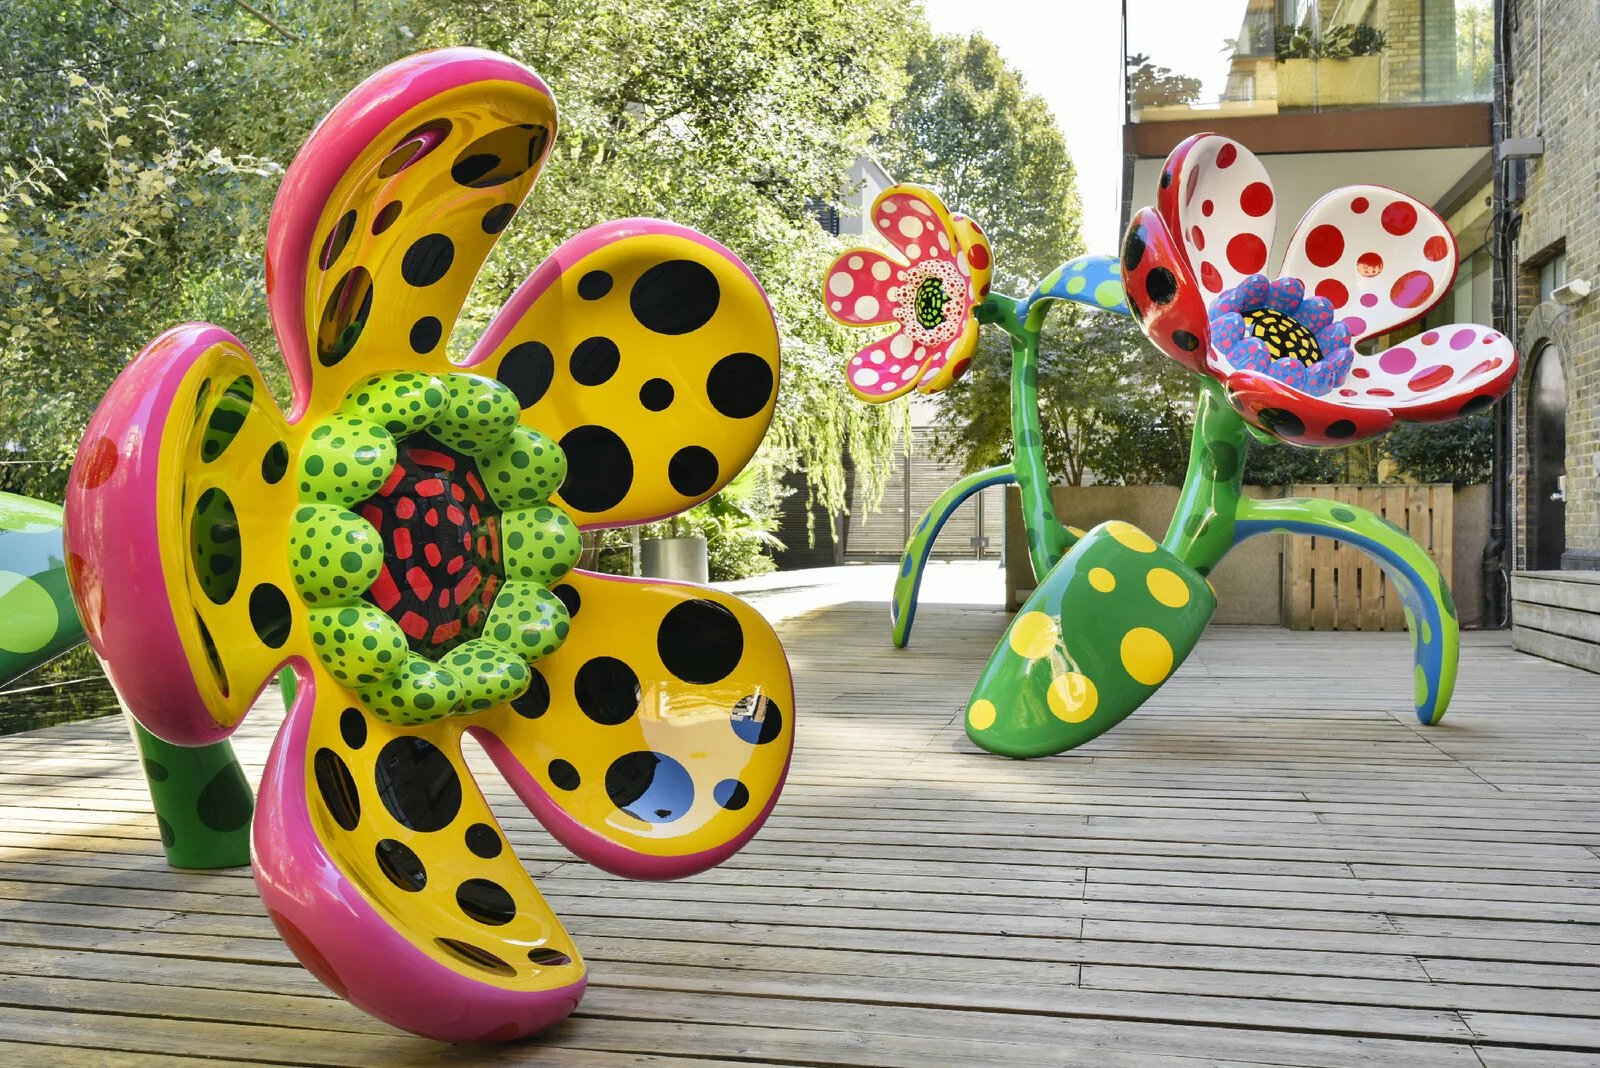 Yayoi Kusama escultura al aire libre de flores titulada Flowers that speak all about my heart given to the sky